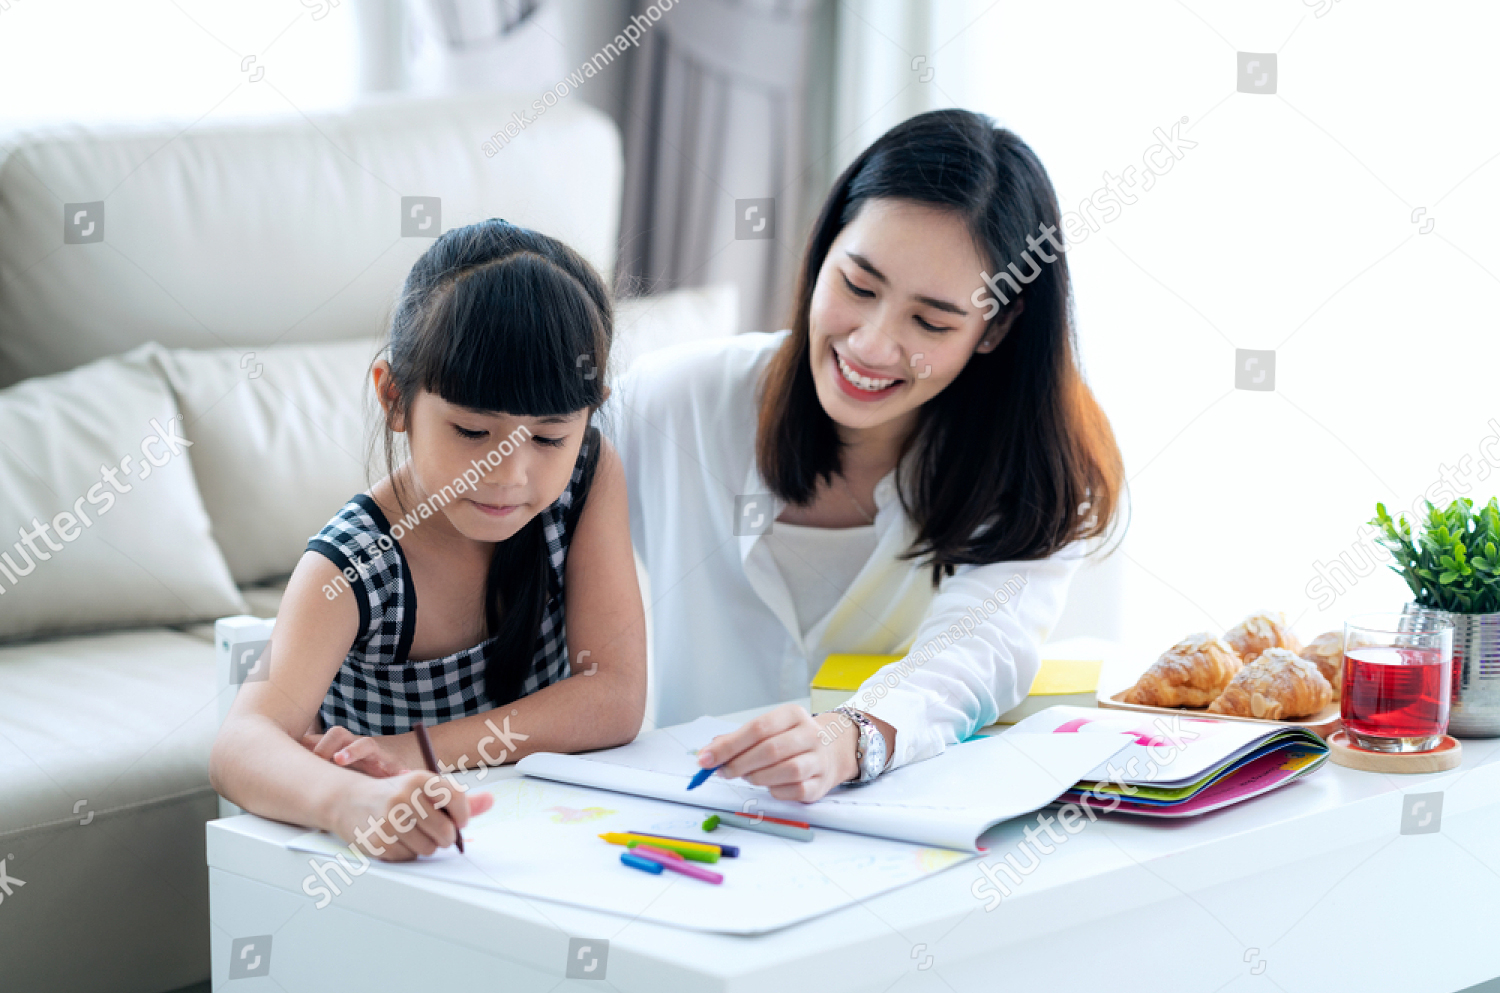 Woman helping child with project